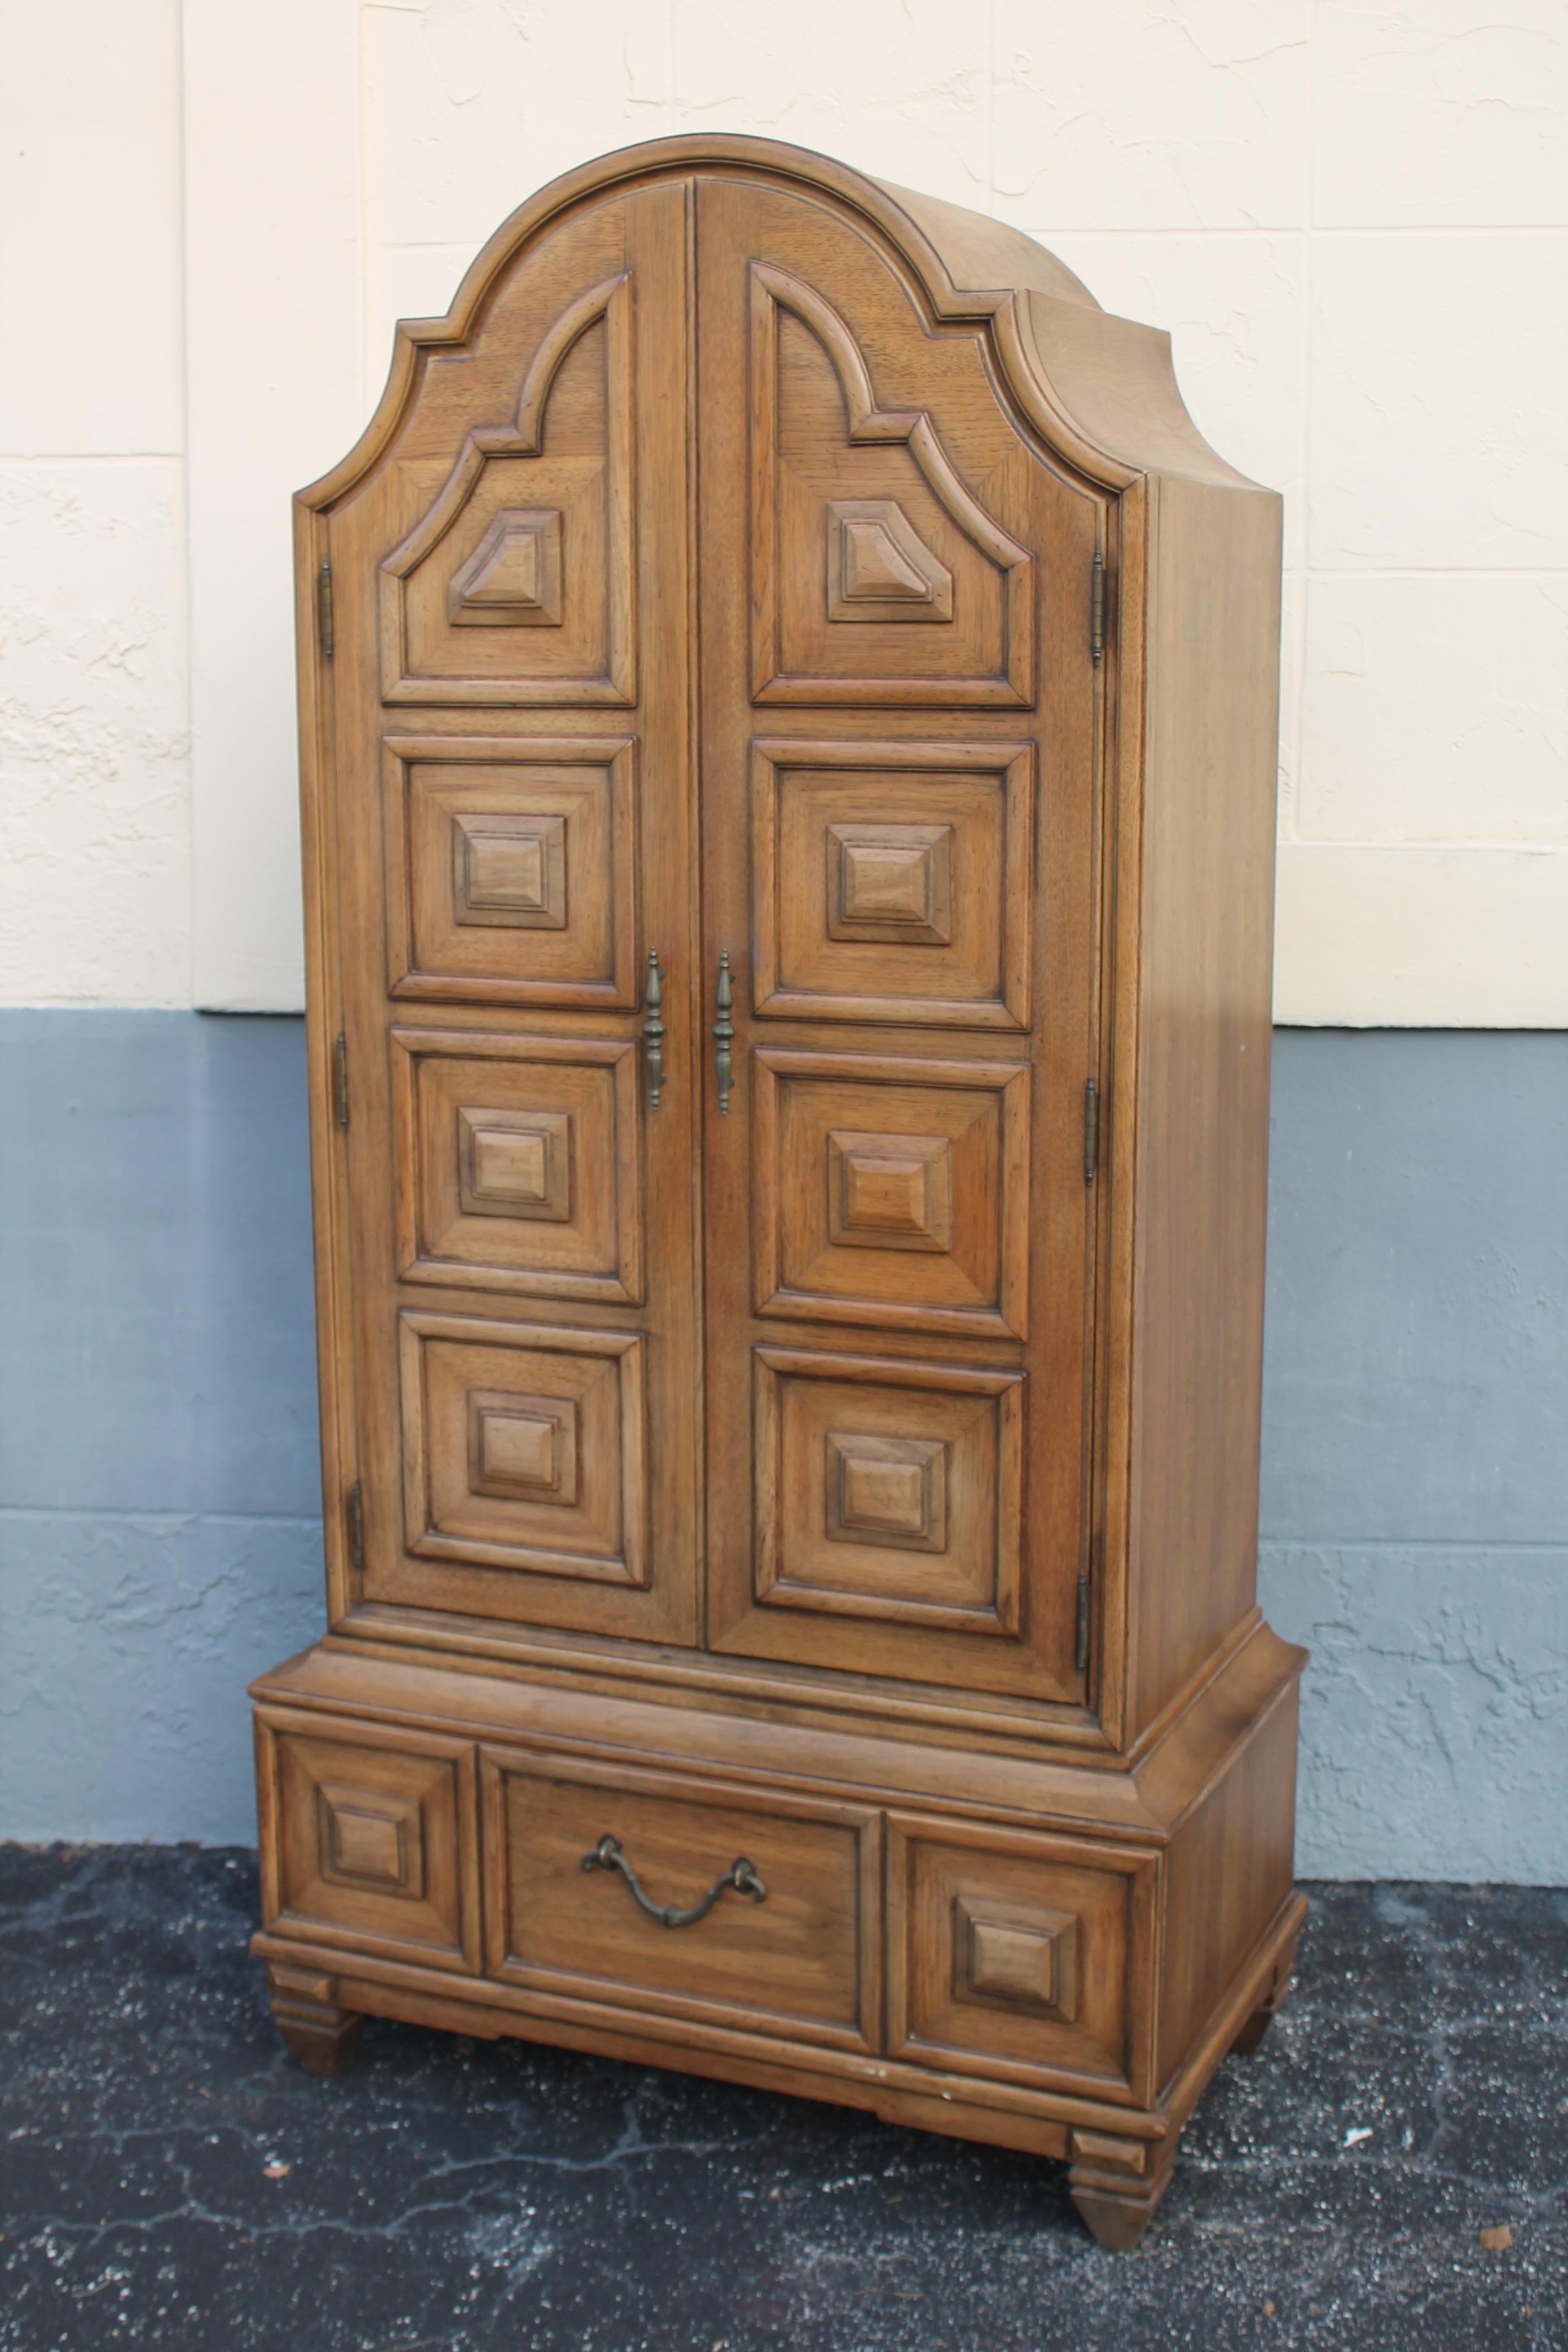 1970's Spectacular Hollywood Regency Tall Dresser/ Wood Panelled Doors Modernage In Good Condition For Sale In Opa Locka, FL